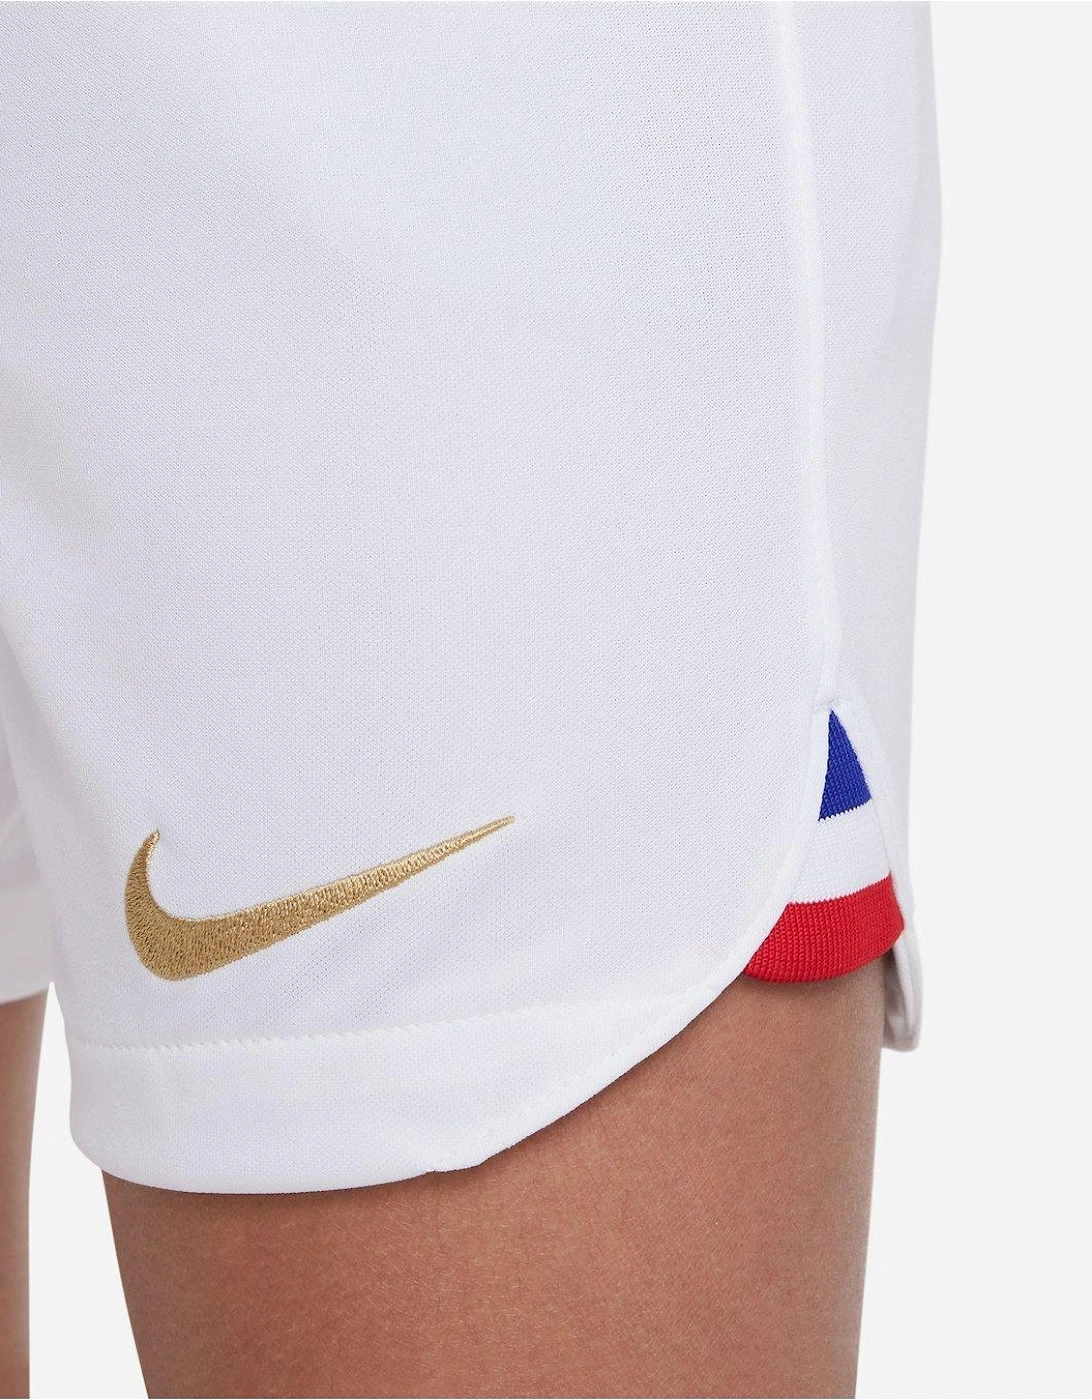 Youth France Home WC 2022 Short - White